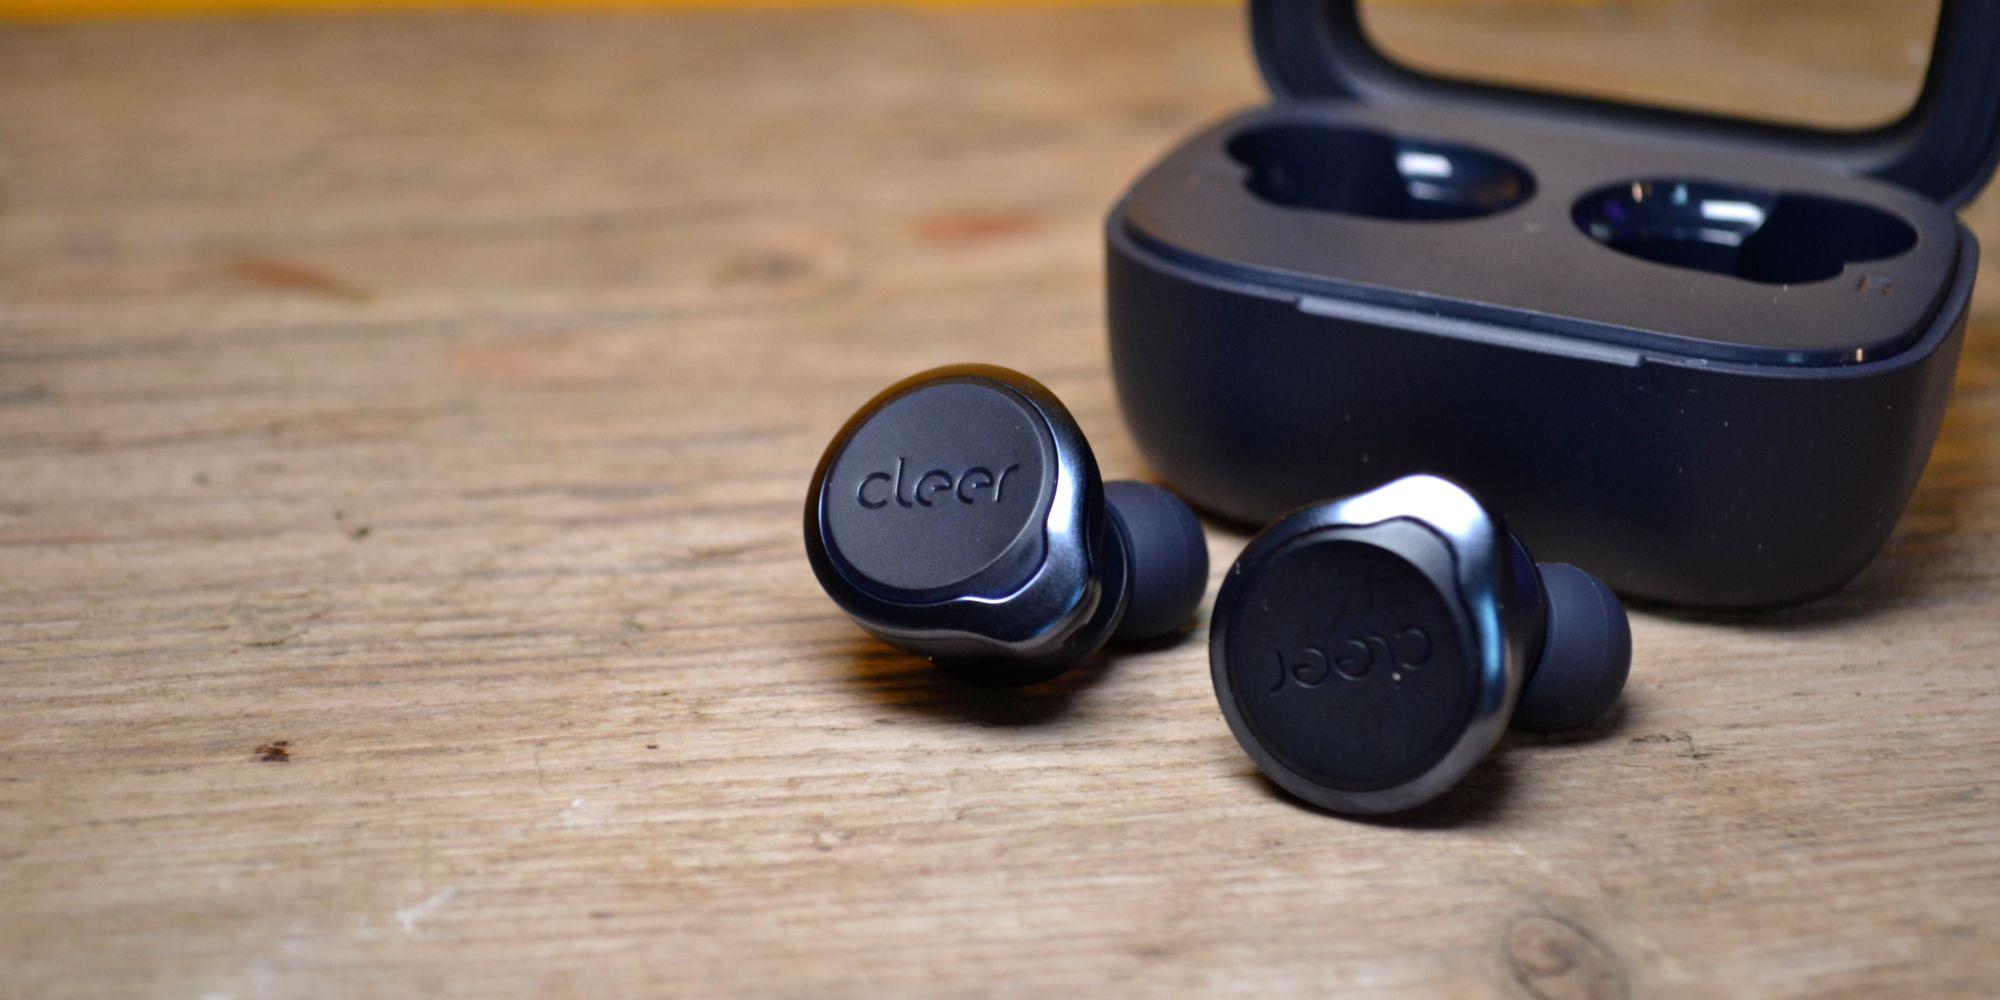 Cleer Ally Plus II Review: Clearly an All-Round Great Package